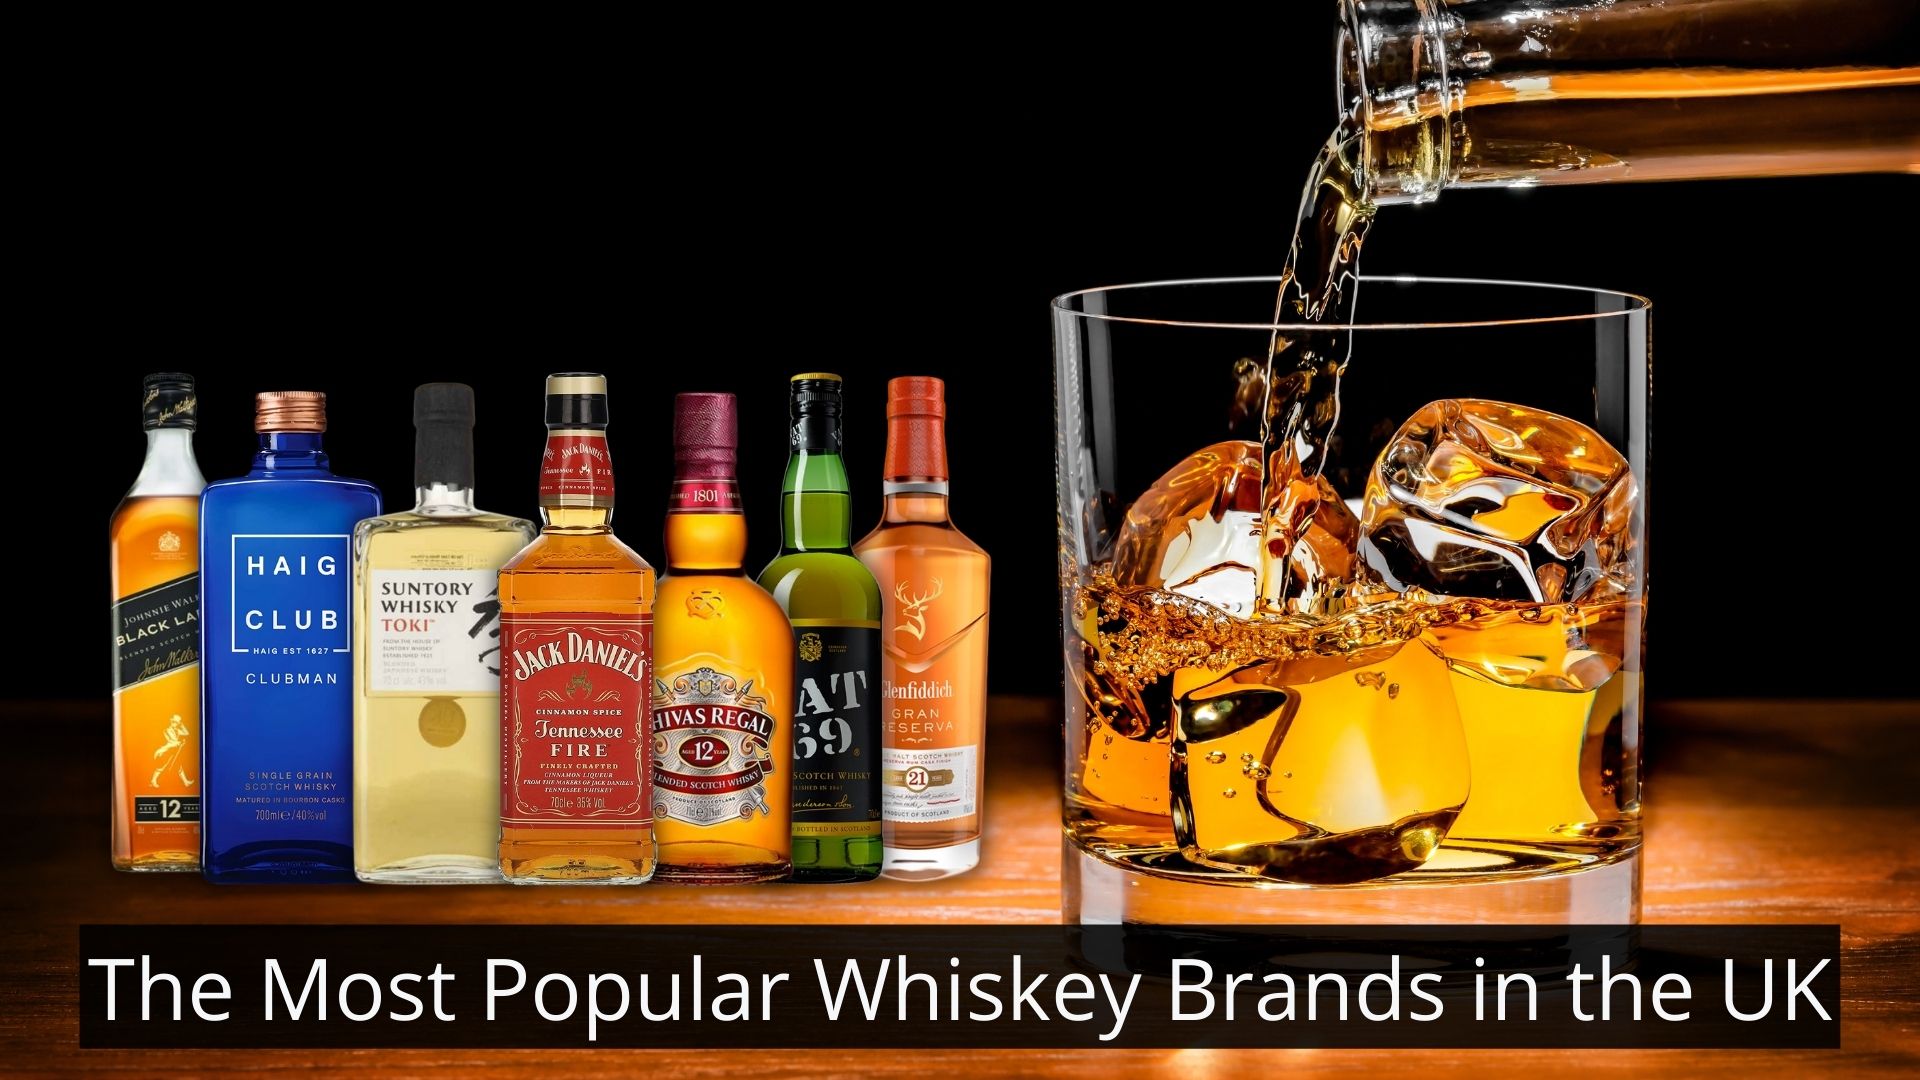 The Most Popular Whiskey Brands in the UK